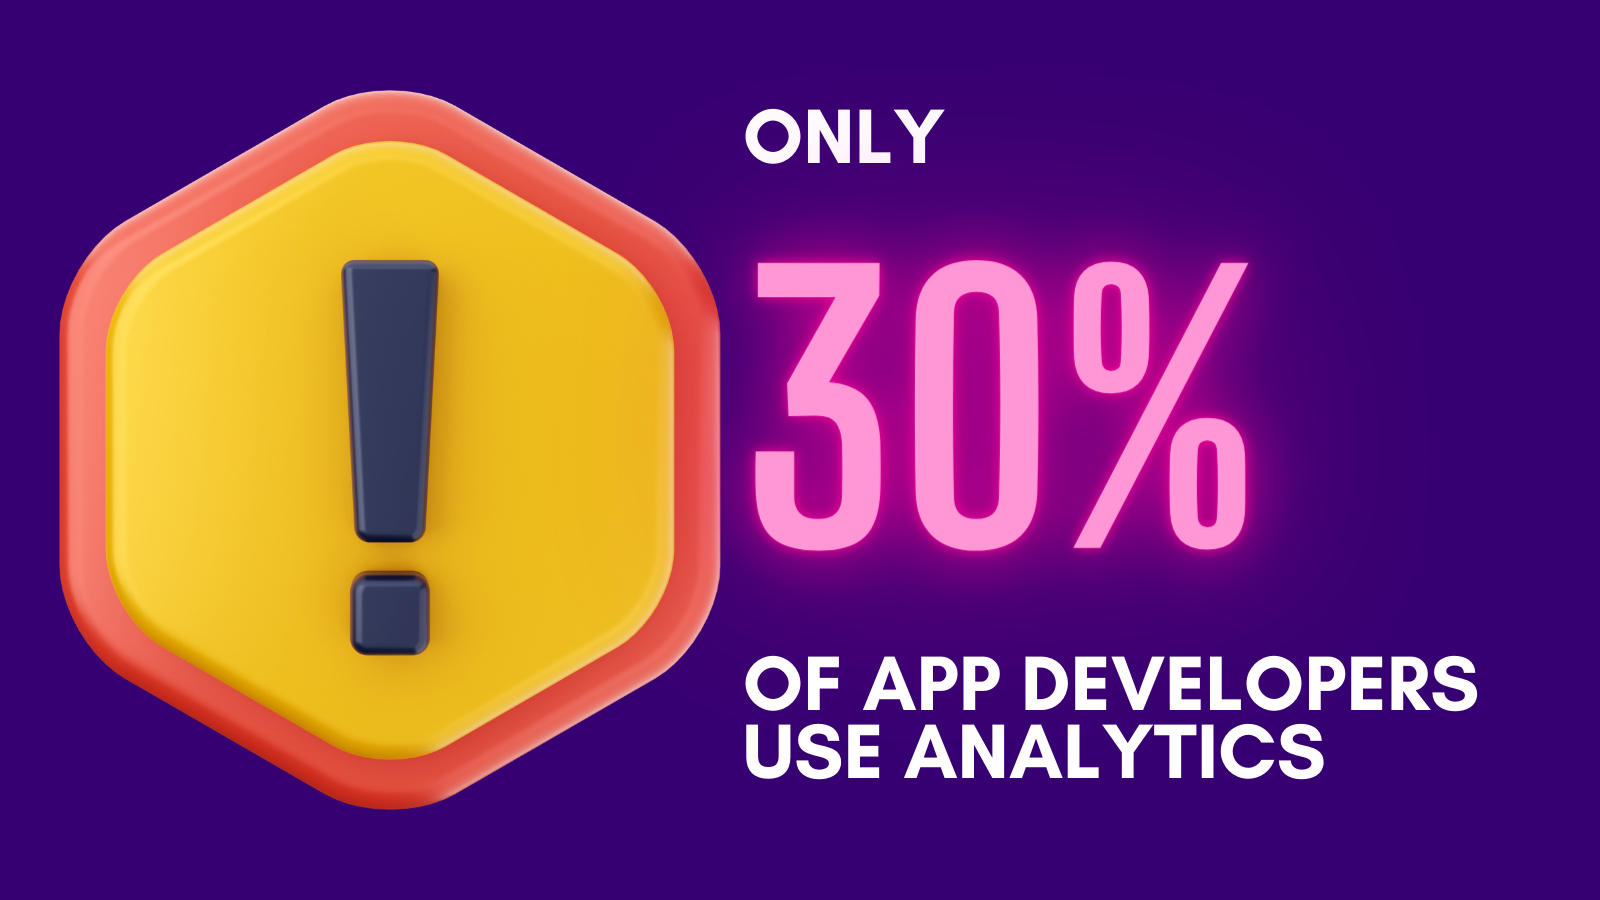 Only 30% of app developers use mobile analytics tools